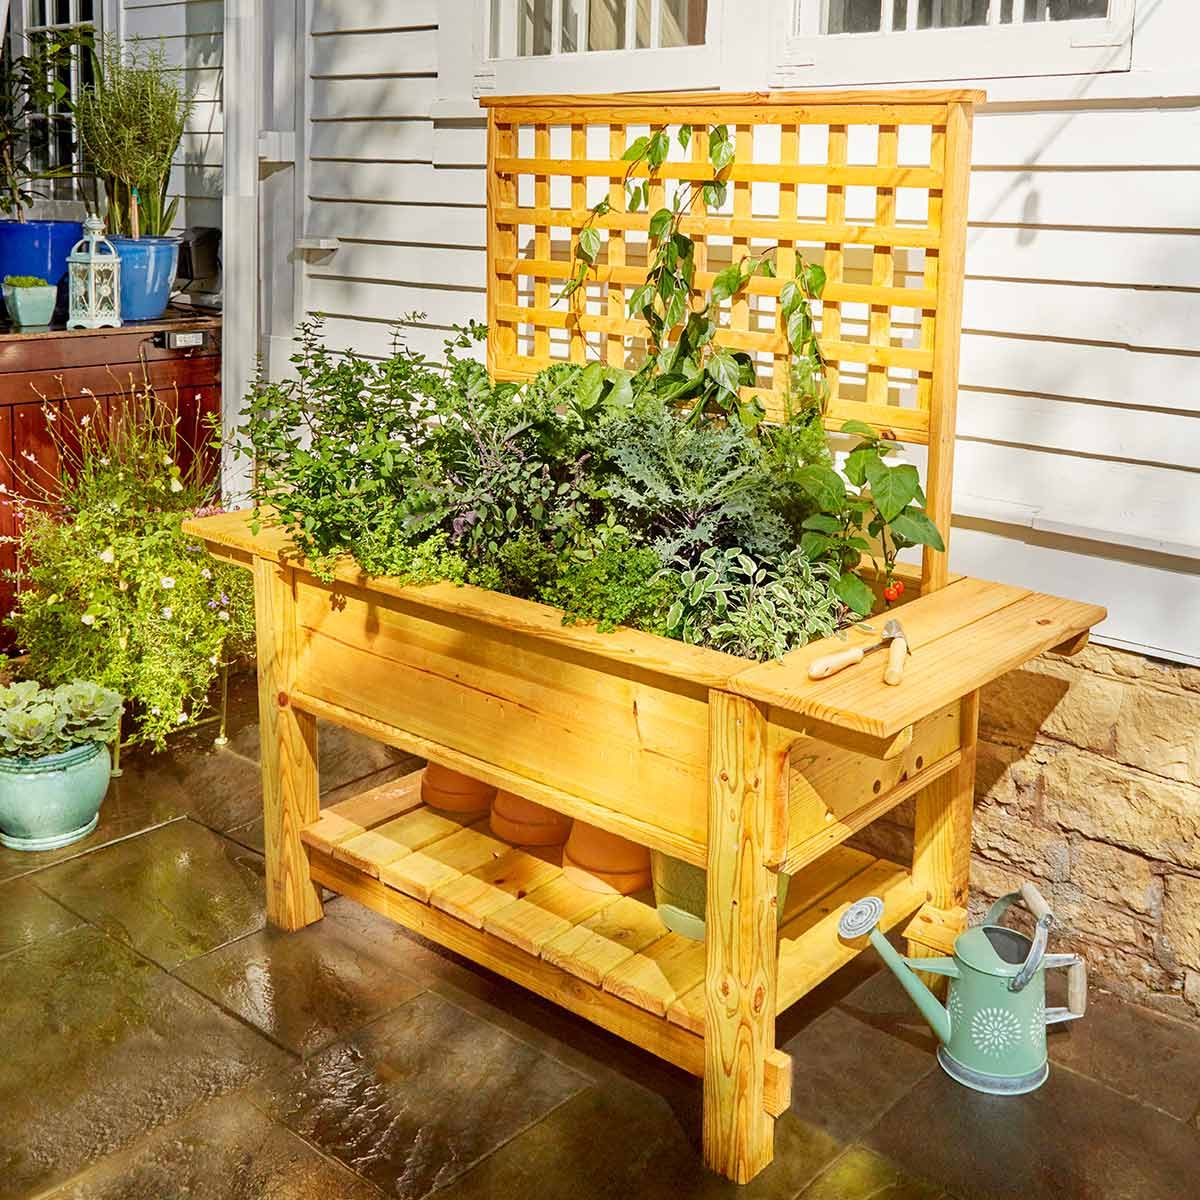 40 Outdoor Woodworking Projects for Beginners The Family 